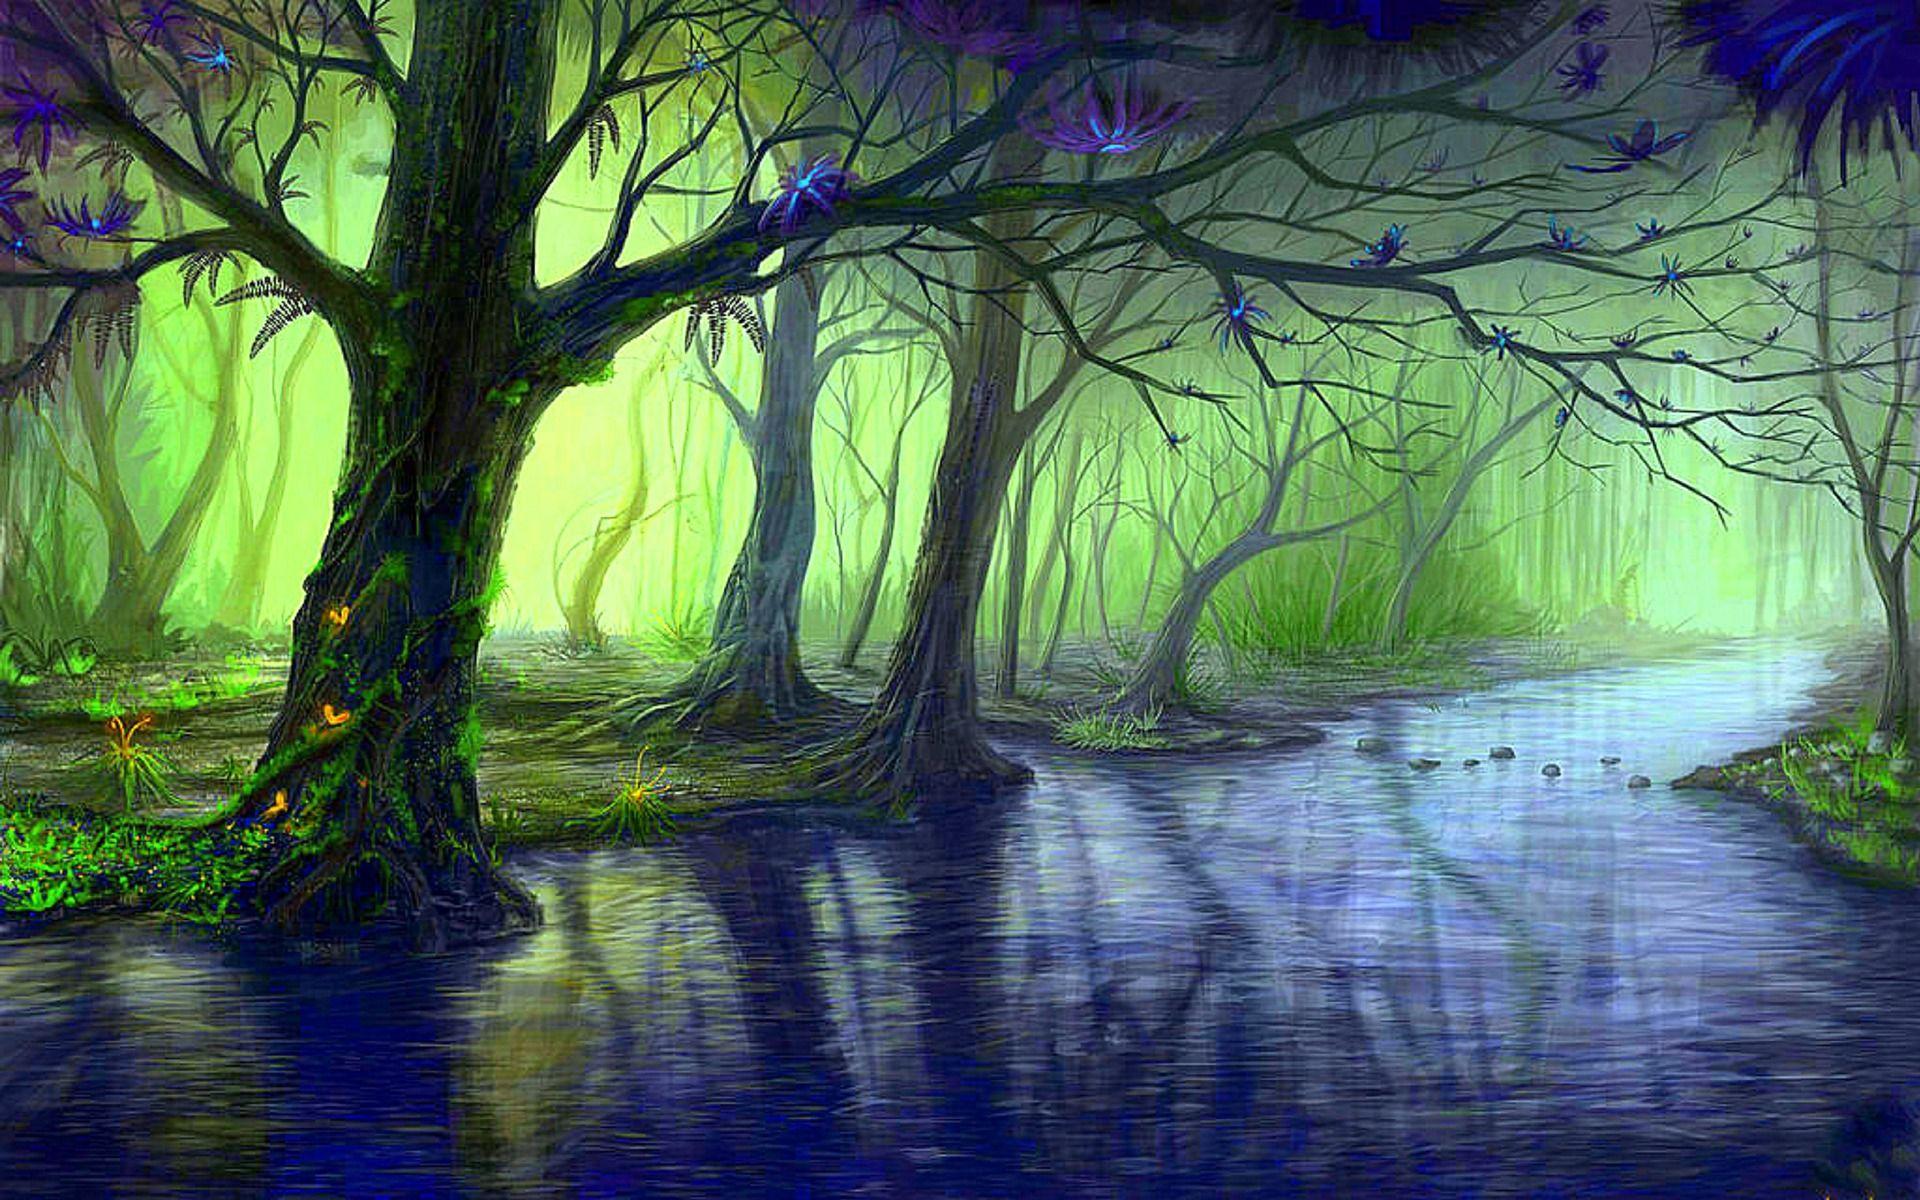 Enchanted Forest & Blue Stream wallpaper. Enchanted Forest